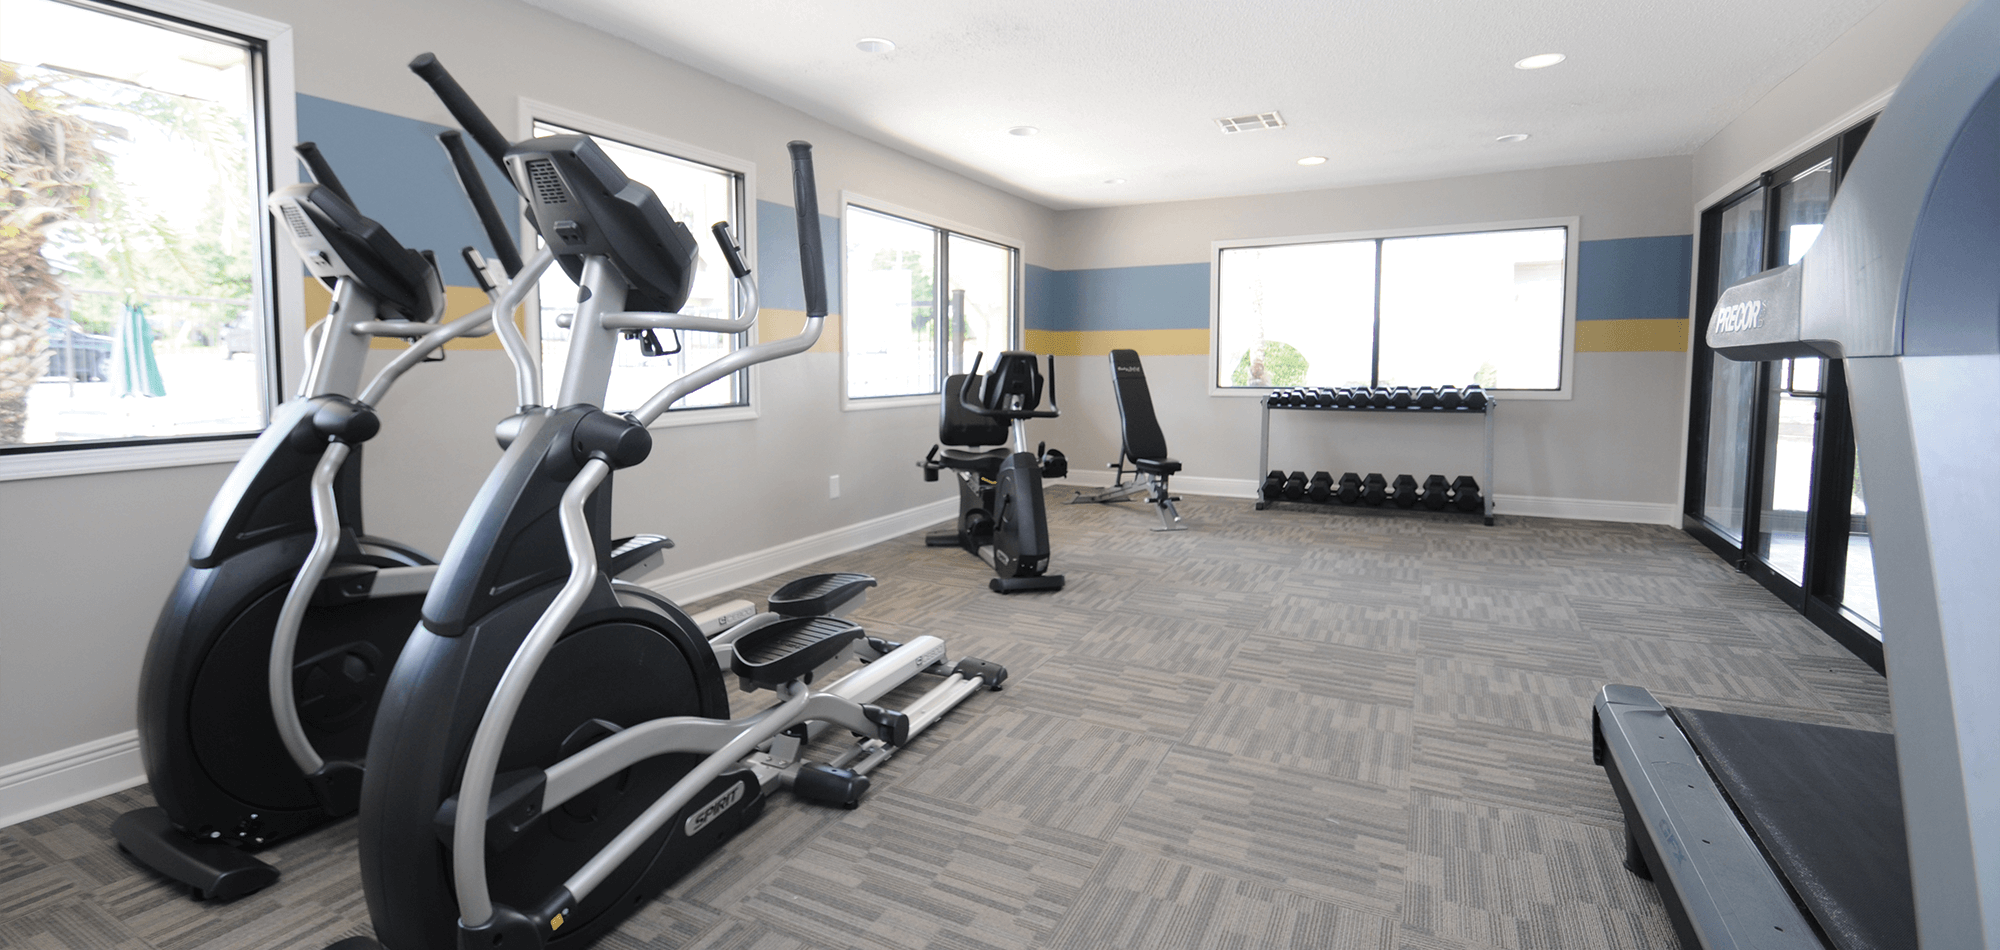 Community workout room at 701 South apartments showing the treadmill, elliptical machines and weights